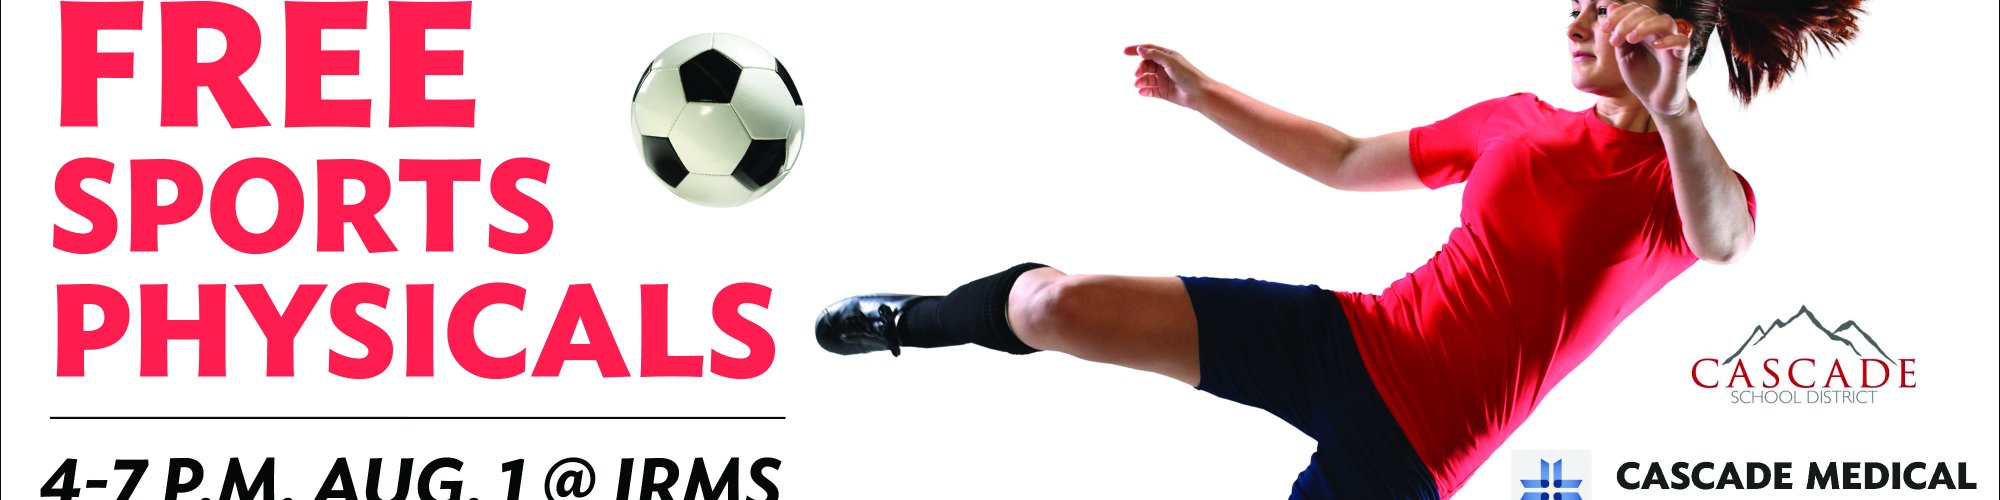 Free sports physicals 4-7 p.m. Aug. 1 at IRMS